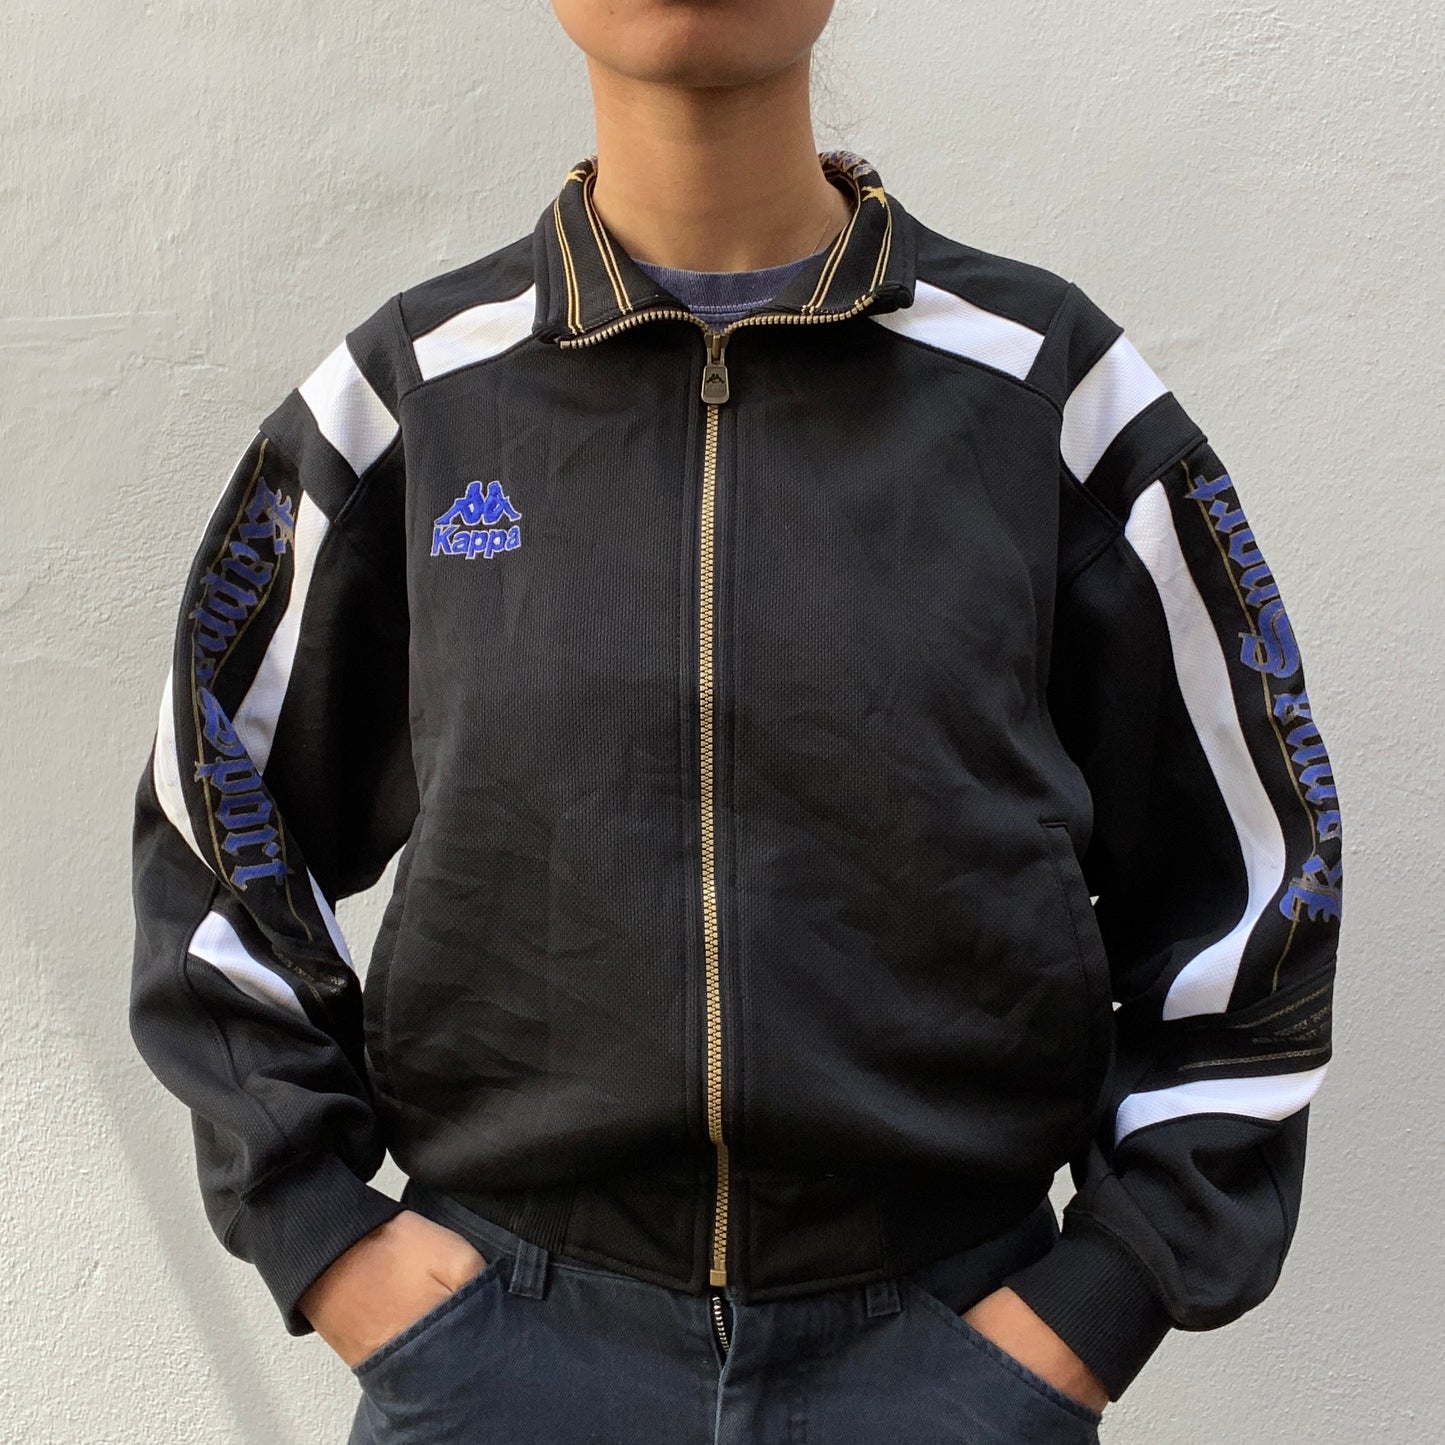 90s Japanese Black Kappa Track Suit Front